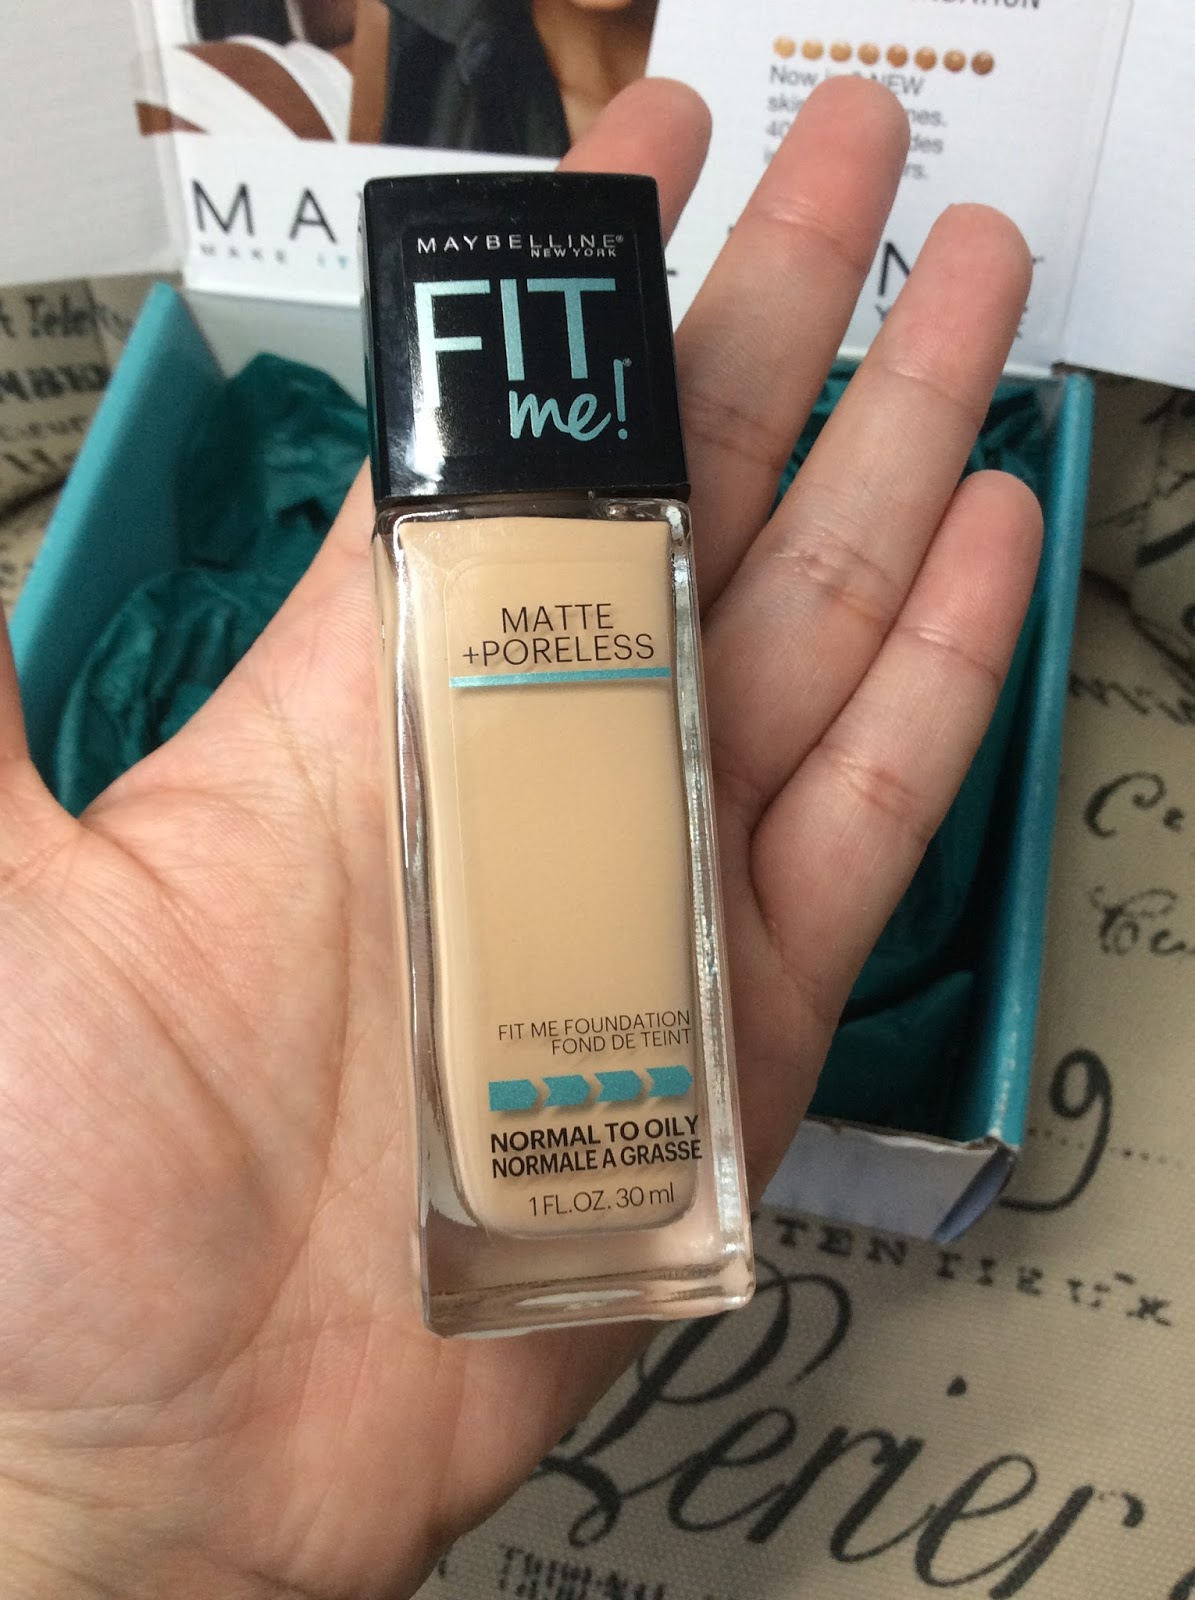 Nesca's Nook: My Experience with Maybelline Fit Me Foundation